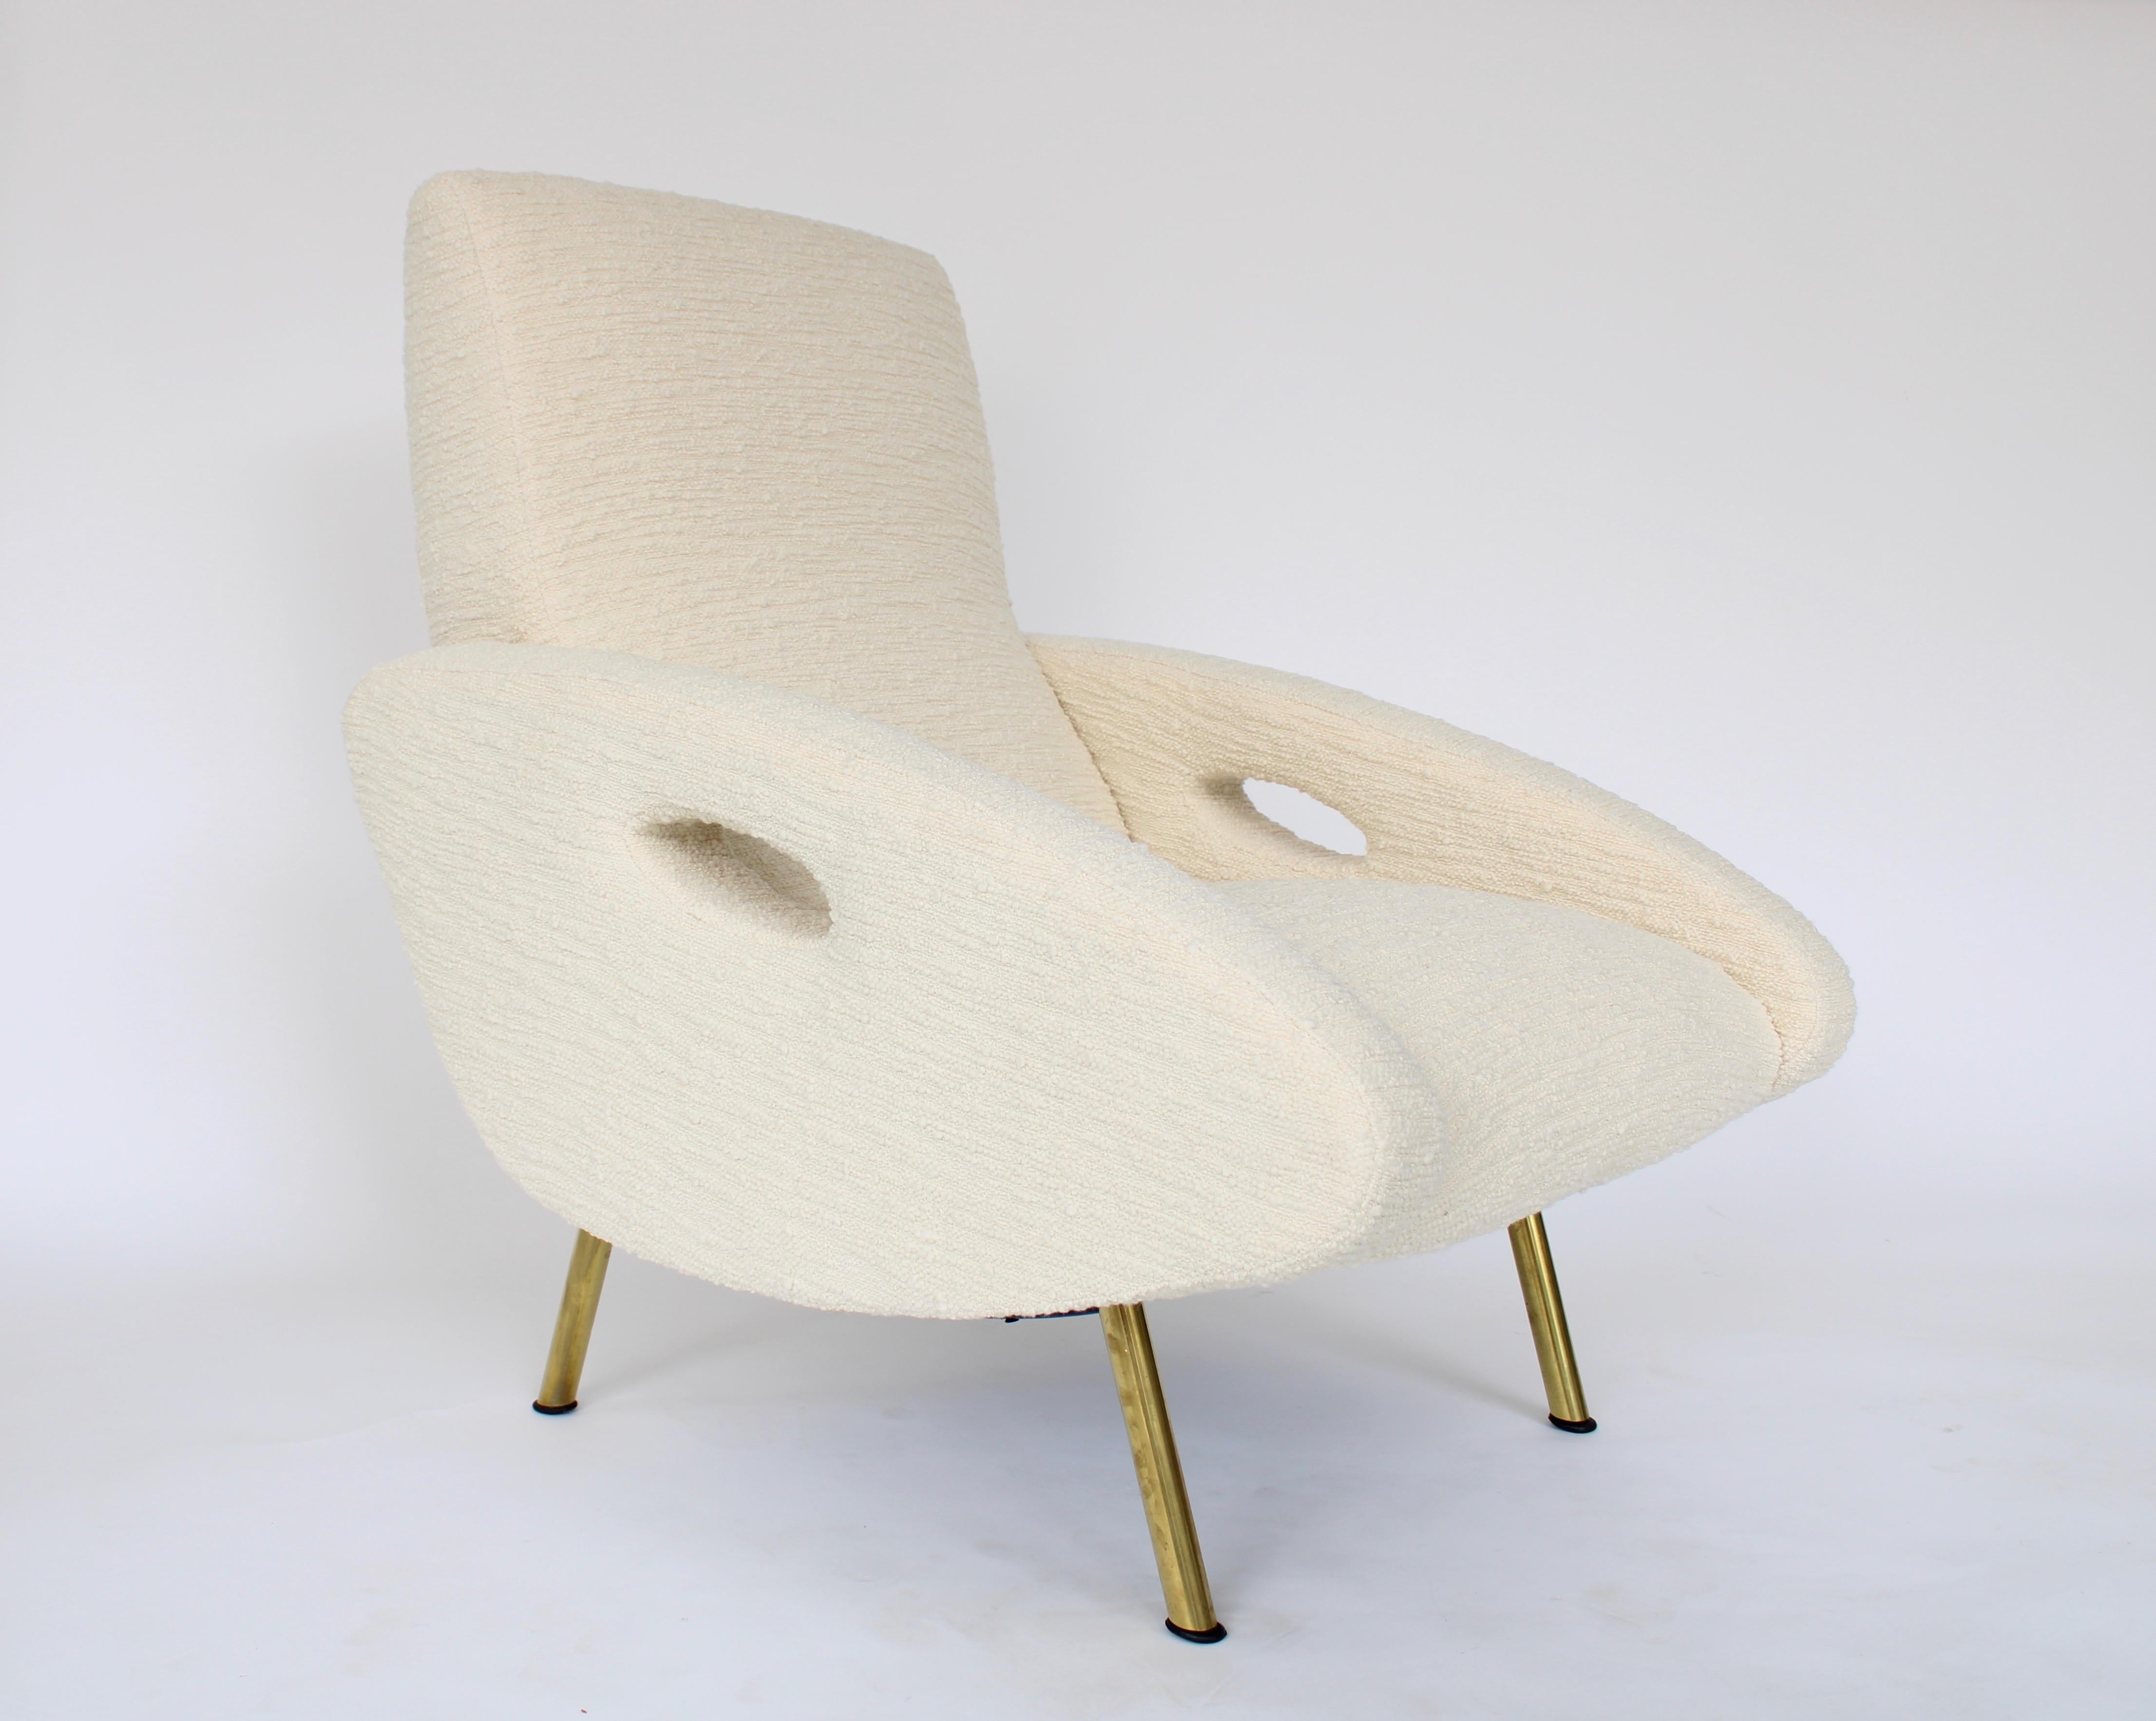 Pair of French lounge chairs designed by Francois Letourneur and edited by Maurice Mourra, Paris and are expertly reupholstered in cream Judith boucle by Pierre Frey. 
These chairs are rare and are an iconic design by Letourneur. 
The large curved